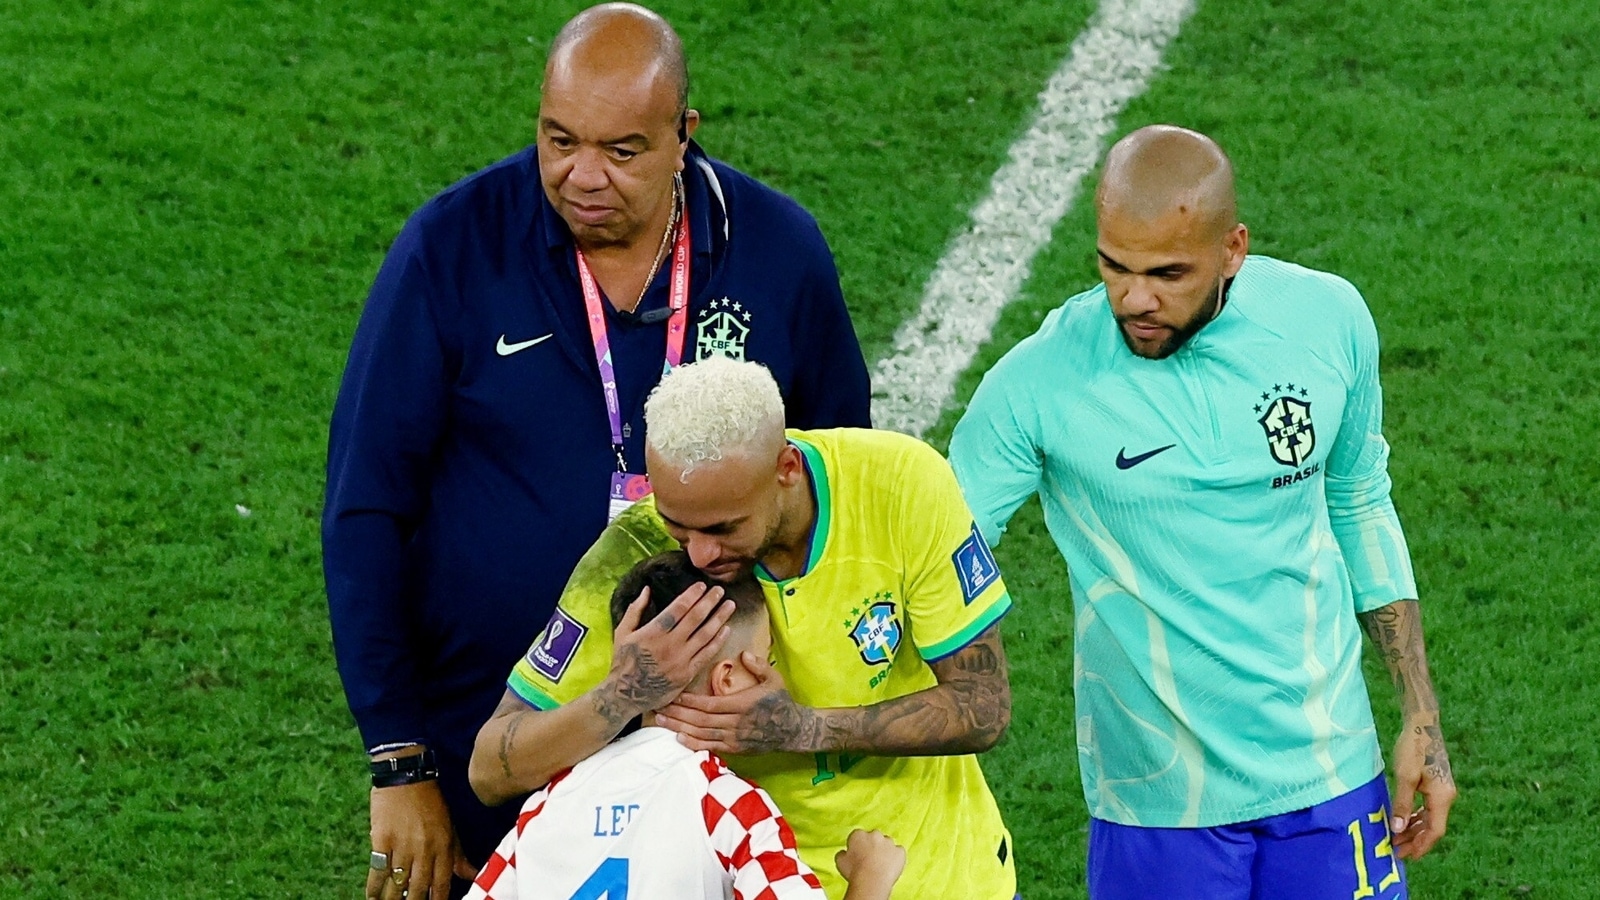 Fans moved by gesture of Croatia star's son in moments after